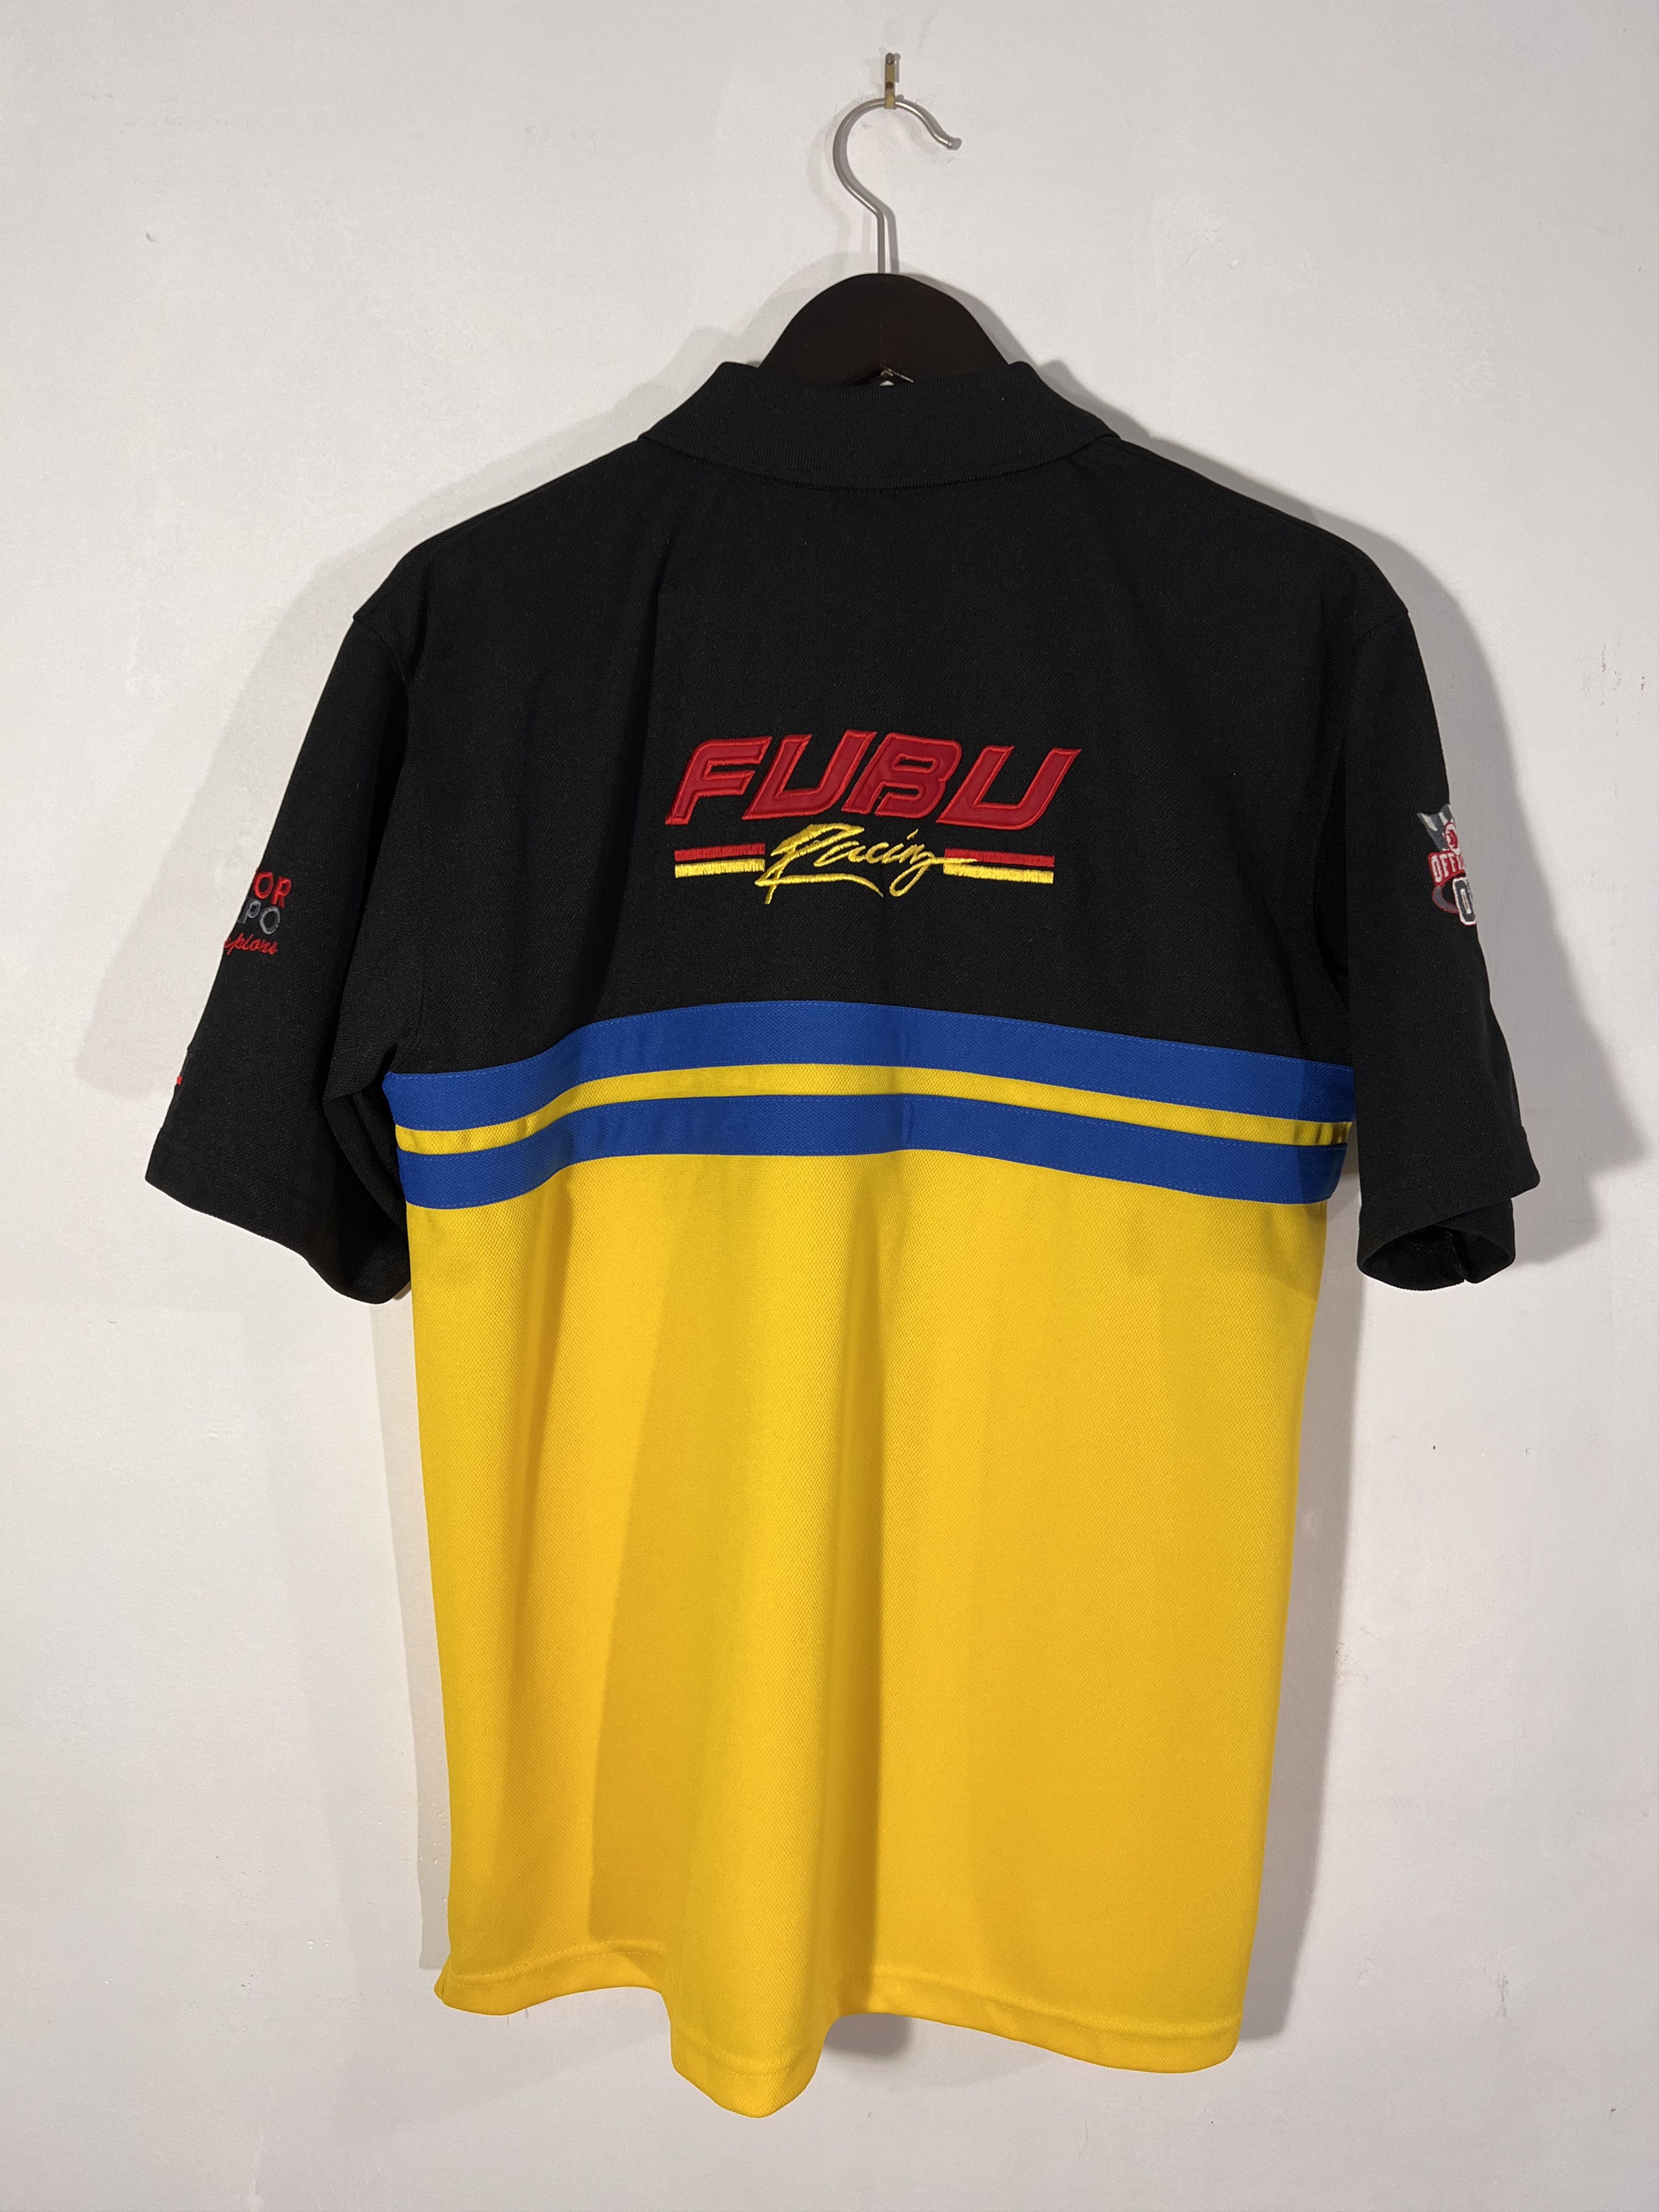 Vintage Vintage FUBU Racing Polo T Shirt The Collection | Grailed